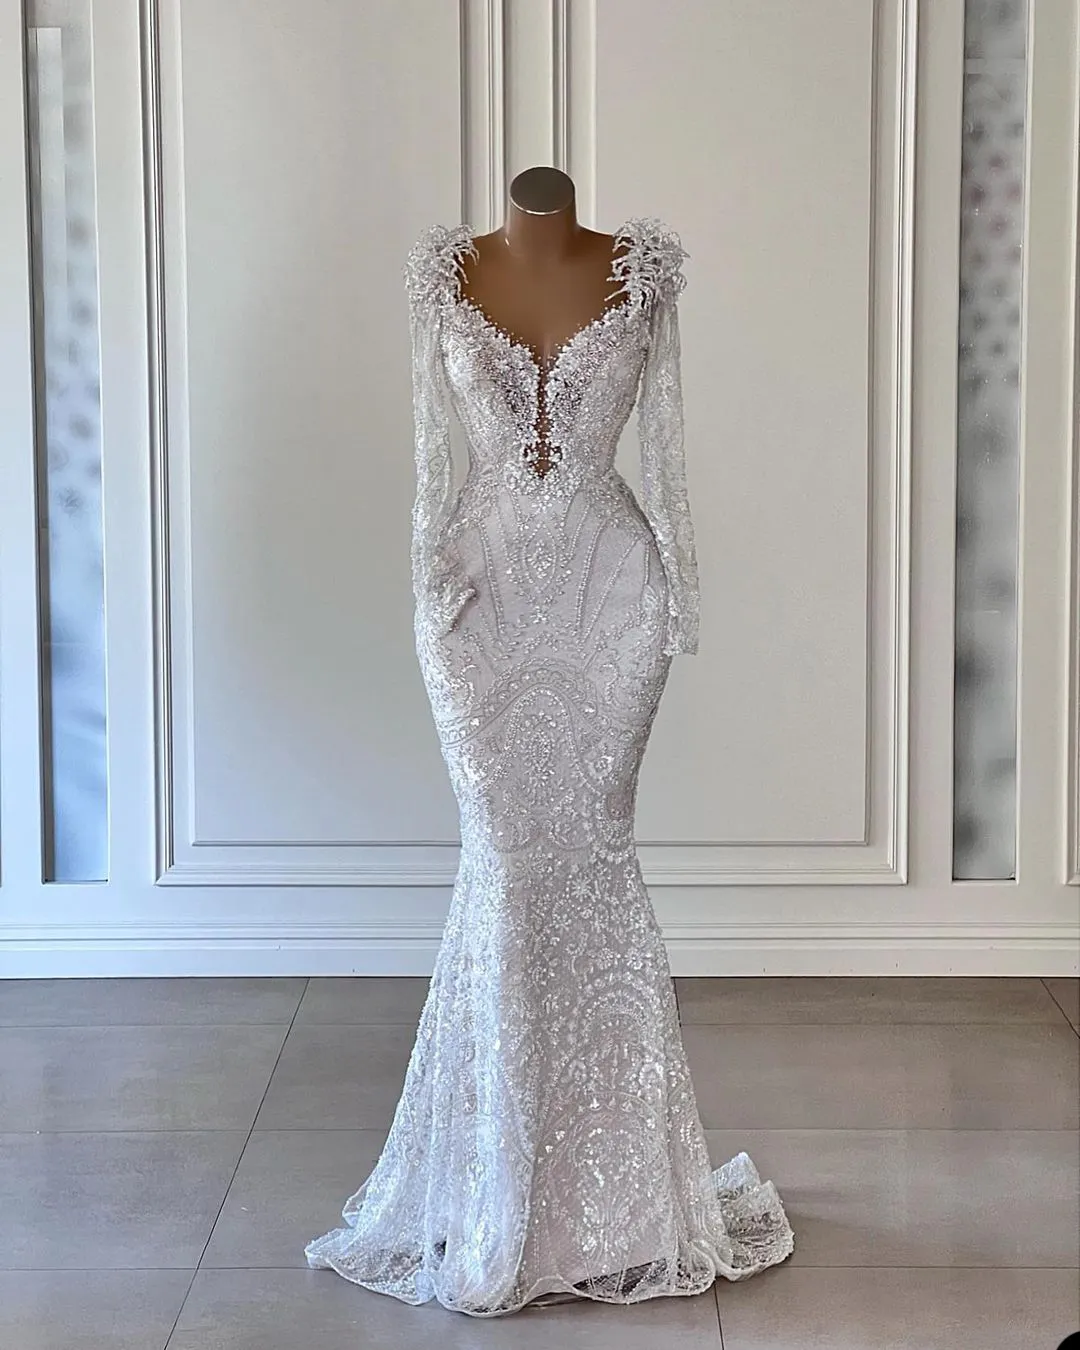 Sparkly 3D Flowers Wedding Dress Sexy V Neck Long Sleeve Beads Lace Bridal Gowns Romantic Bride Dress Robe De Mariee